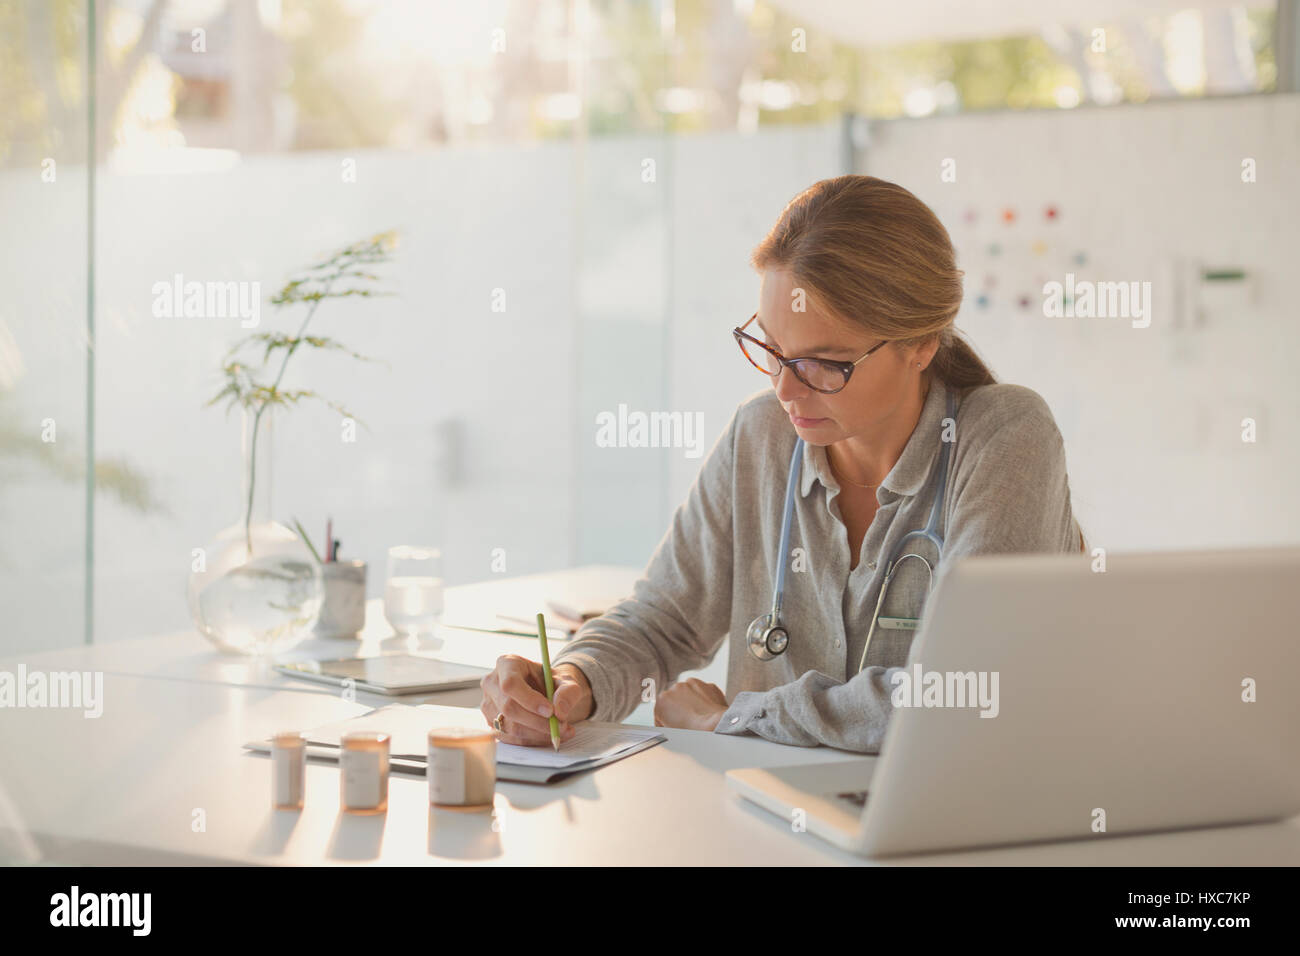 Female doctor writing prescriptions at desk in doctor’s office Stock Photo